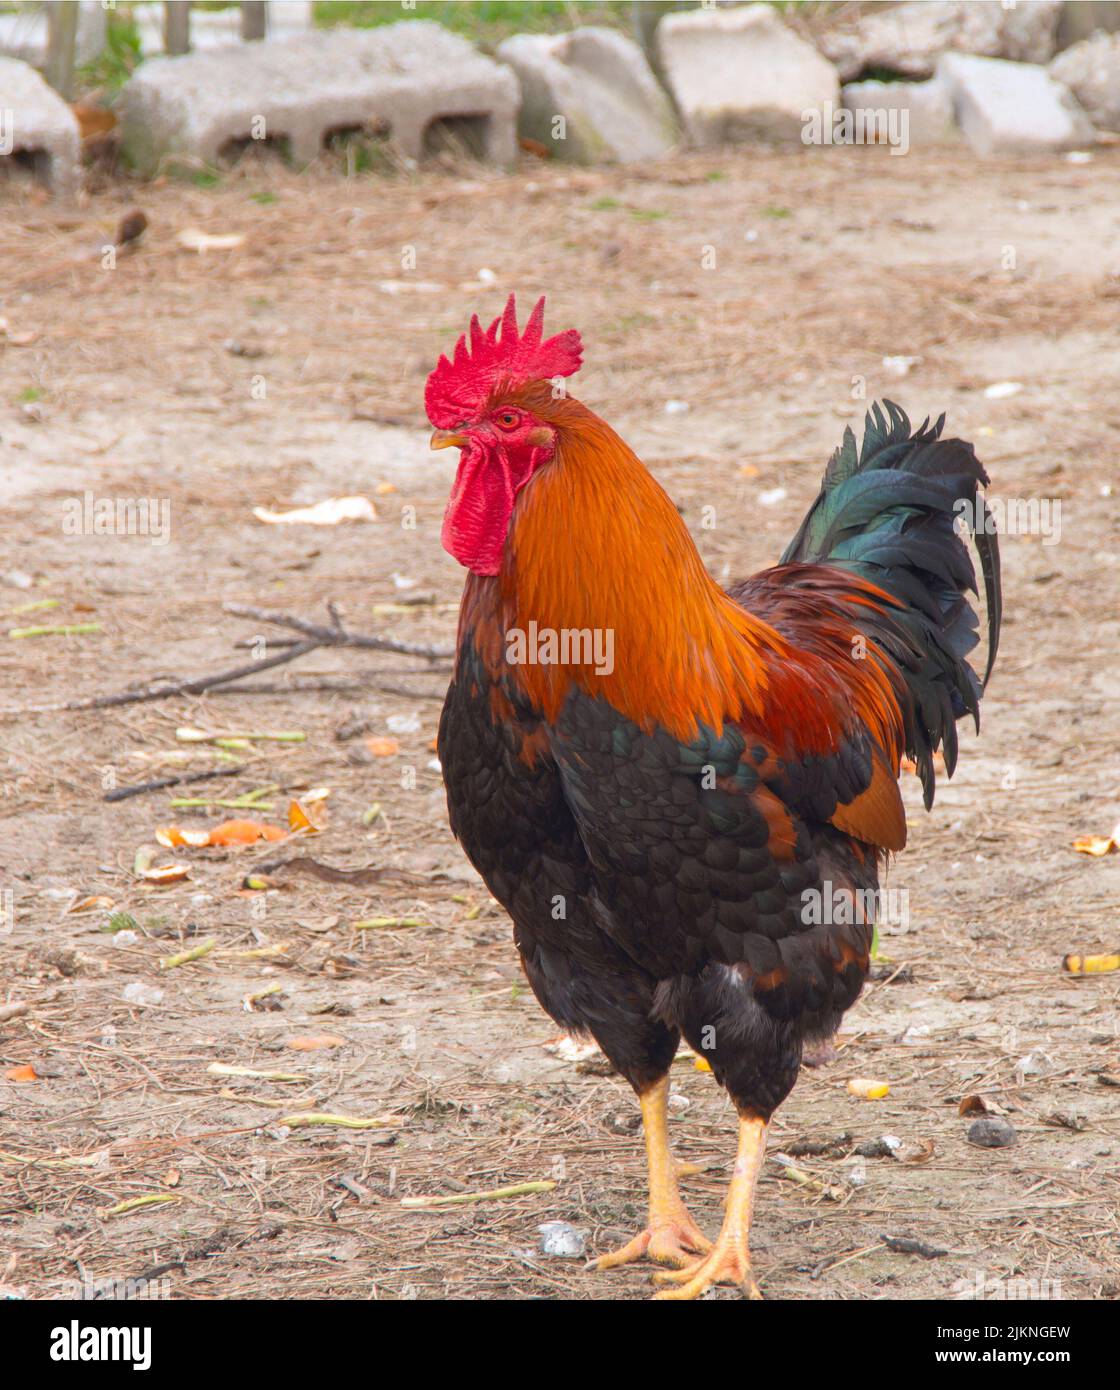 A rooster surveys his domain on a farm in Eastern North Carolina Stock Photo